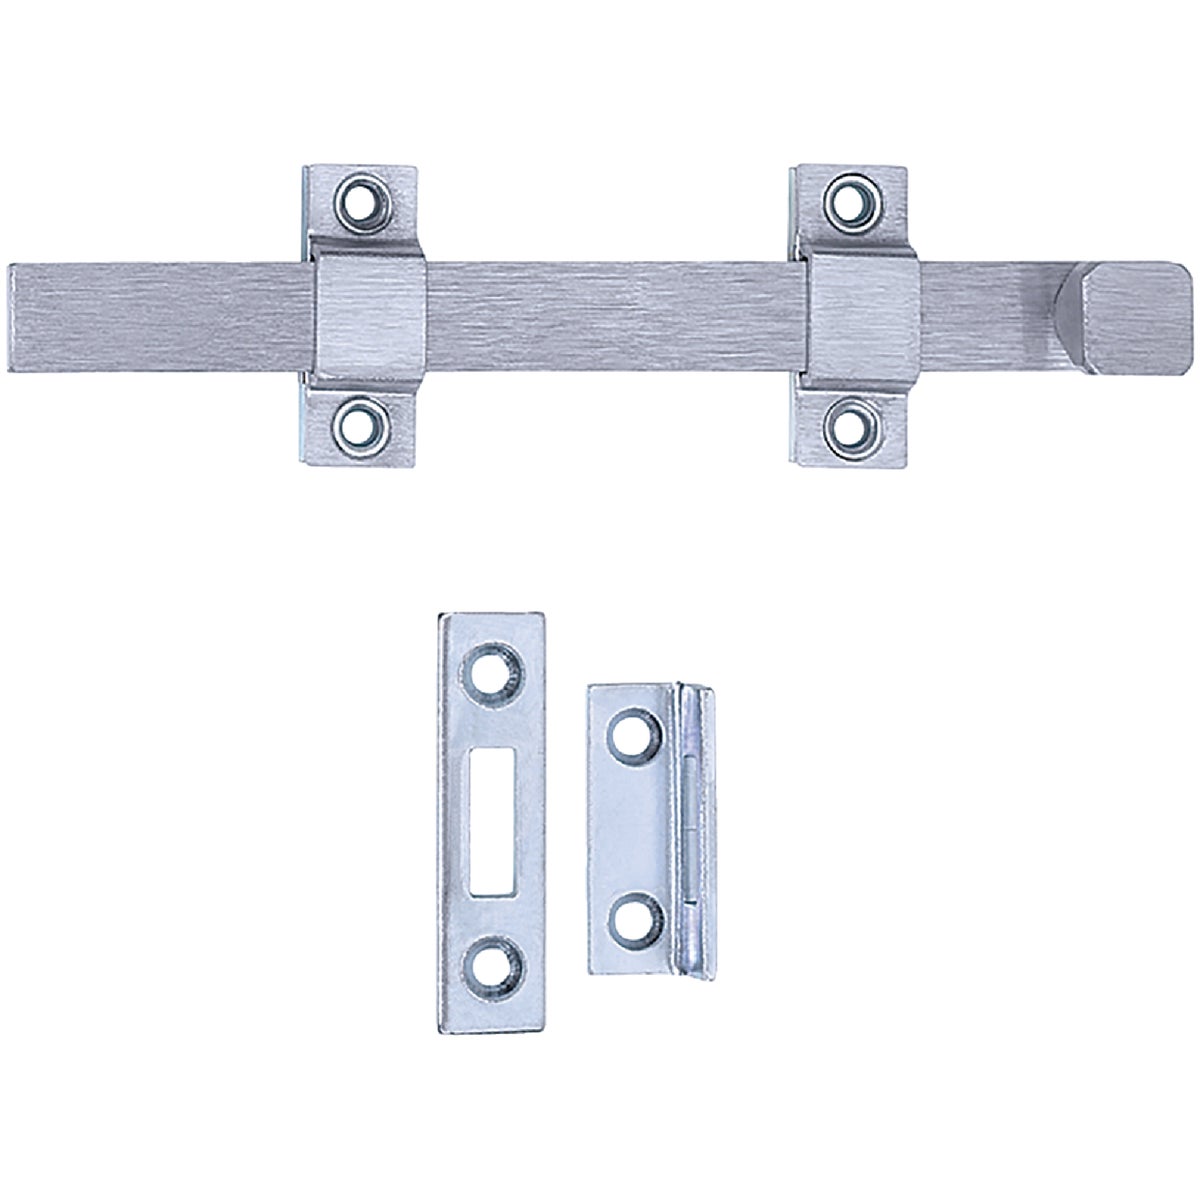 Item 256826, Sturdy solid brass bolt with a satin chrome finish is great for outdoor use